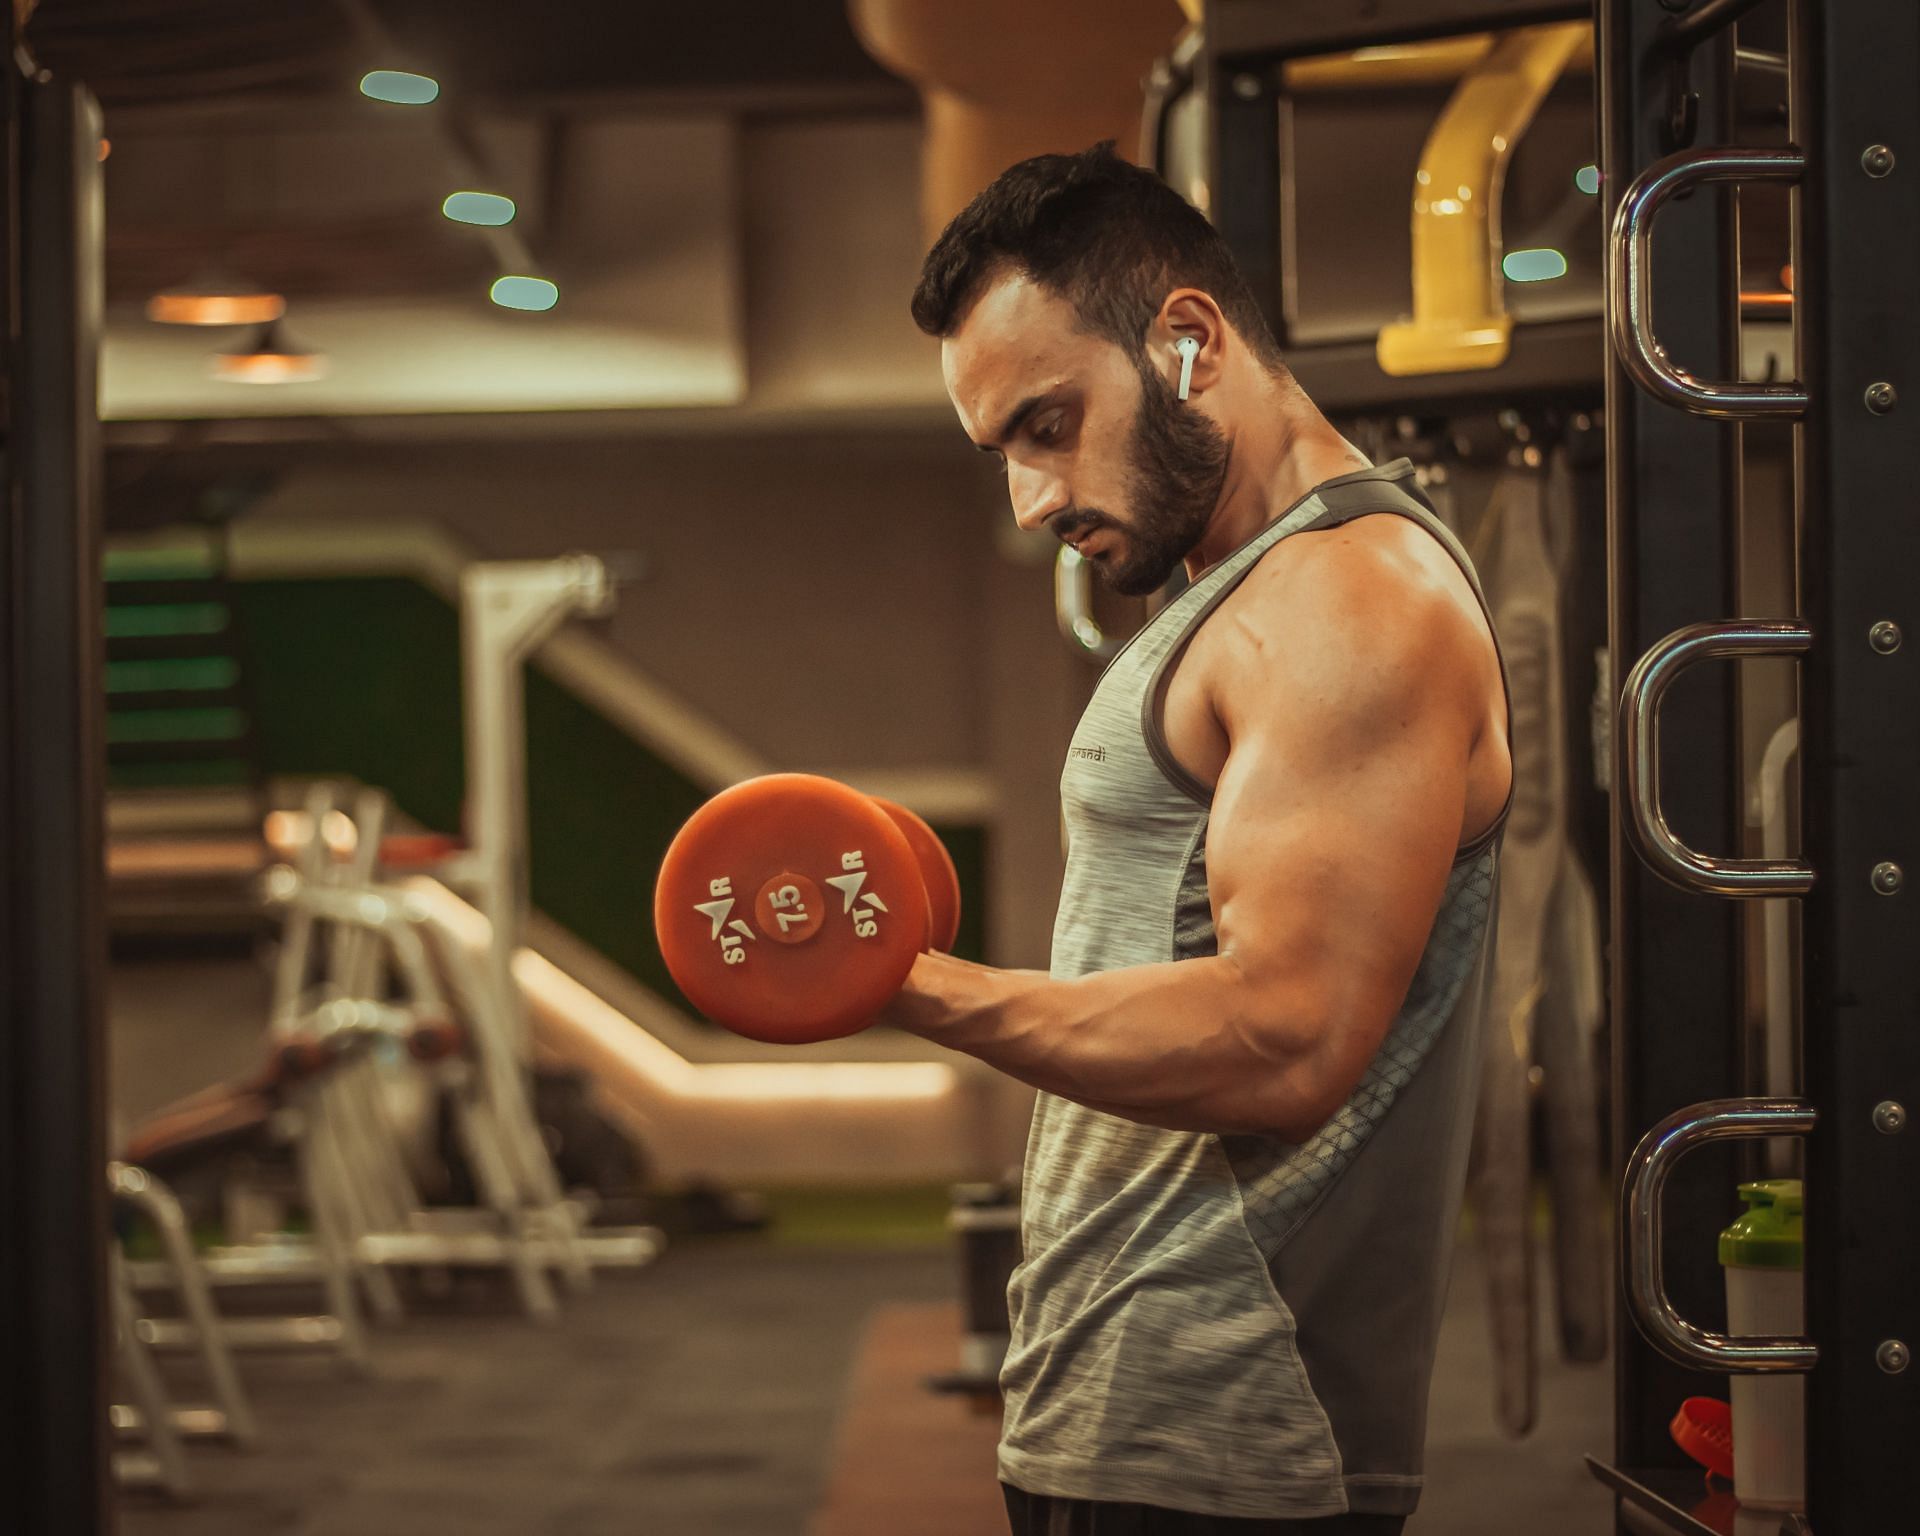 Dumbbell exercises for men help you accelerate fat loss, strengthen maximum muscle mass, build lats and even level up cardio. (Image via Unsplash/ Dollar Gill)